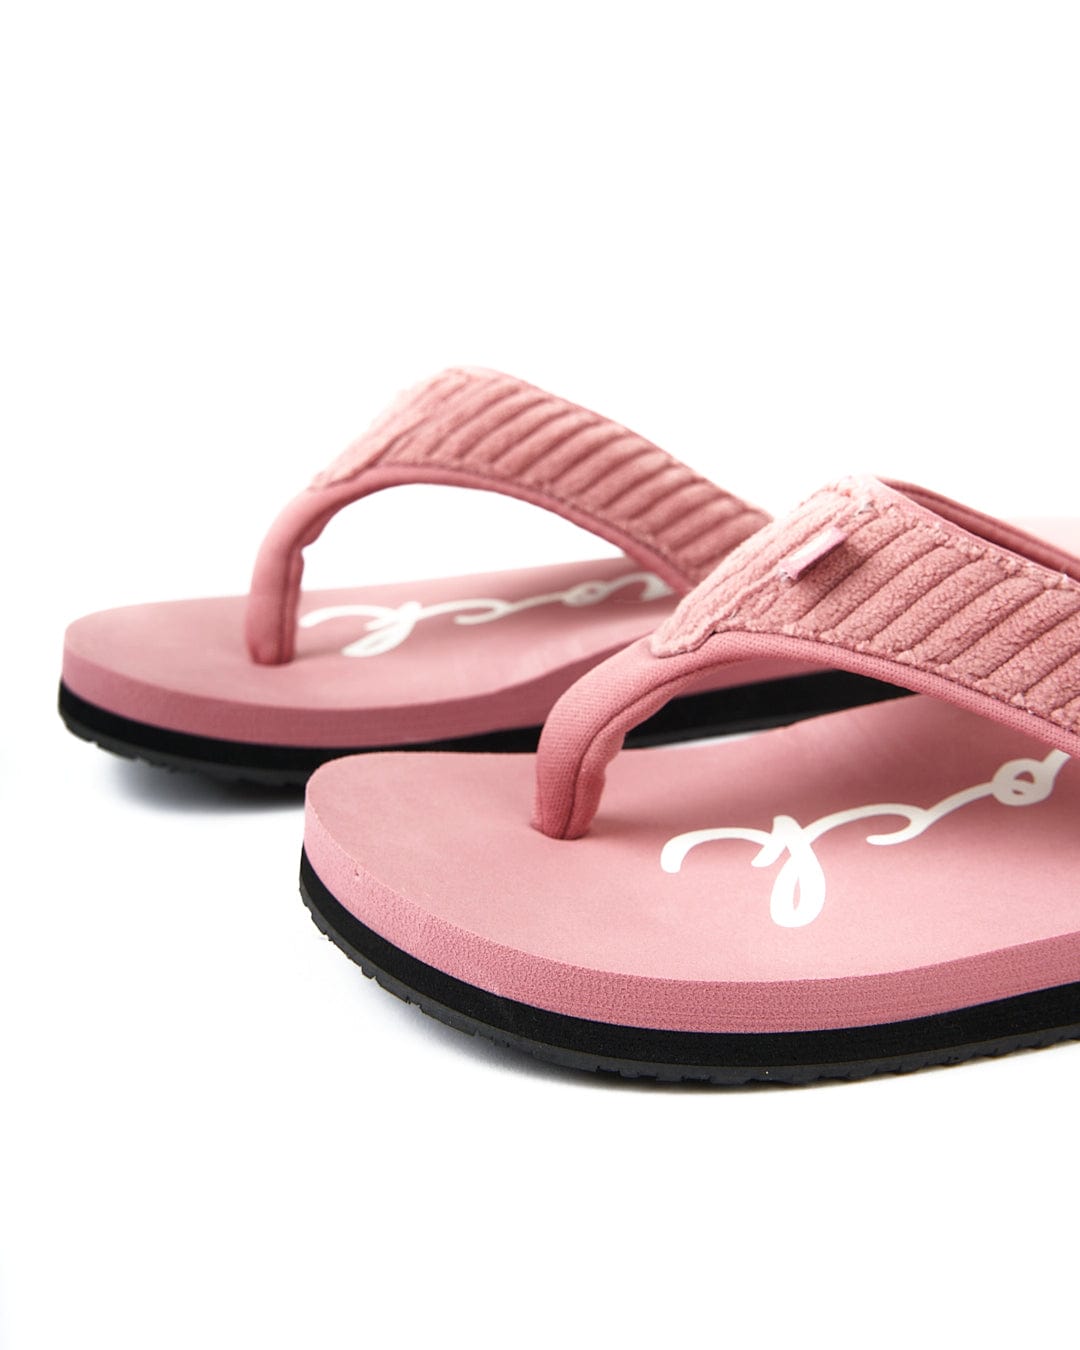 A pair of Saltrock Laguna - Womens Cord Flip Flops - Mid Pink on a white background.